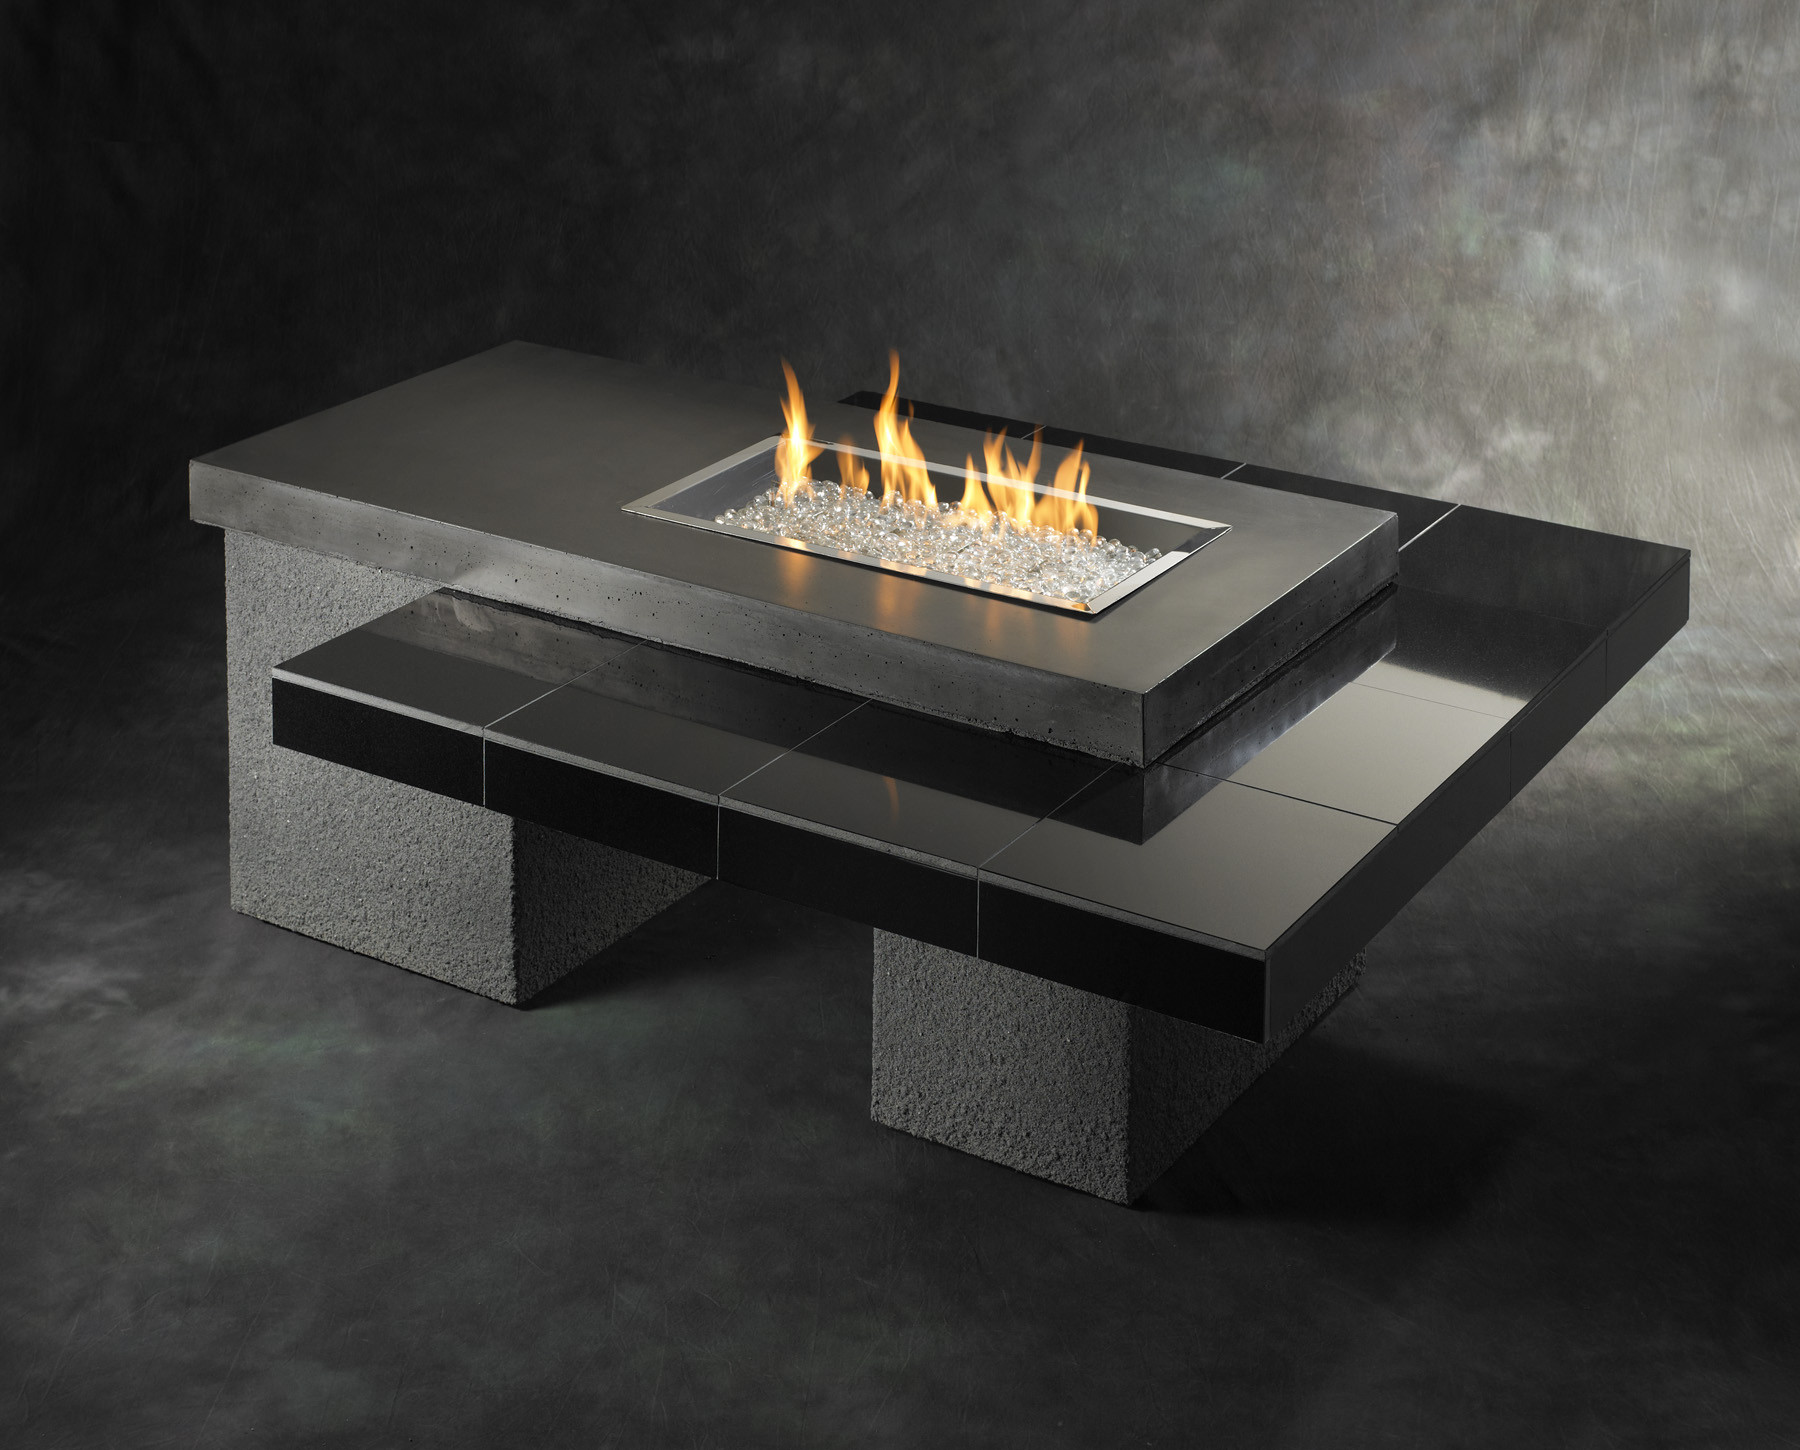 Table Top Fire Pit
 Indoor Fire Pit Table Design Options